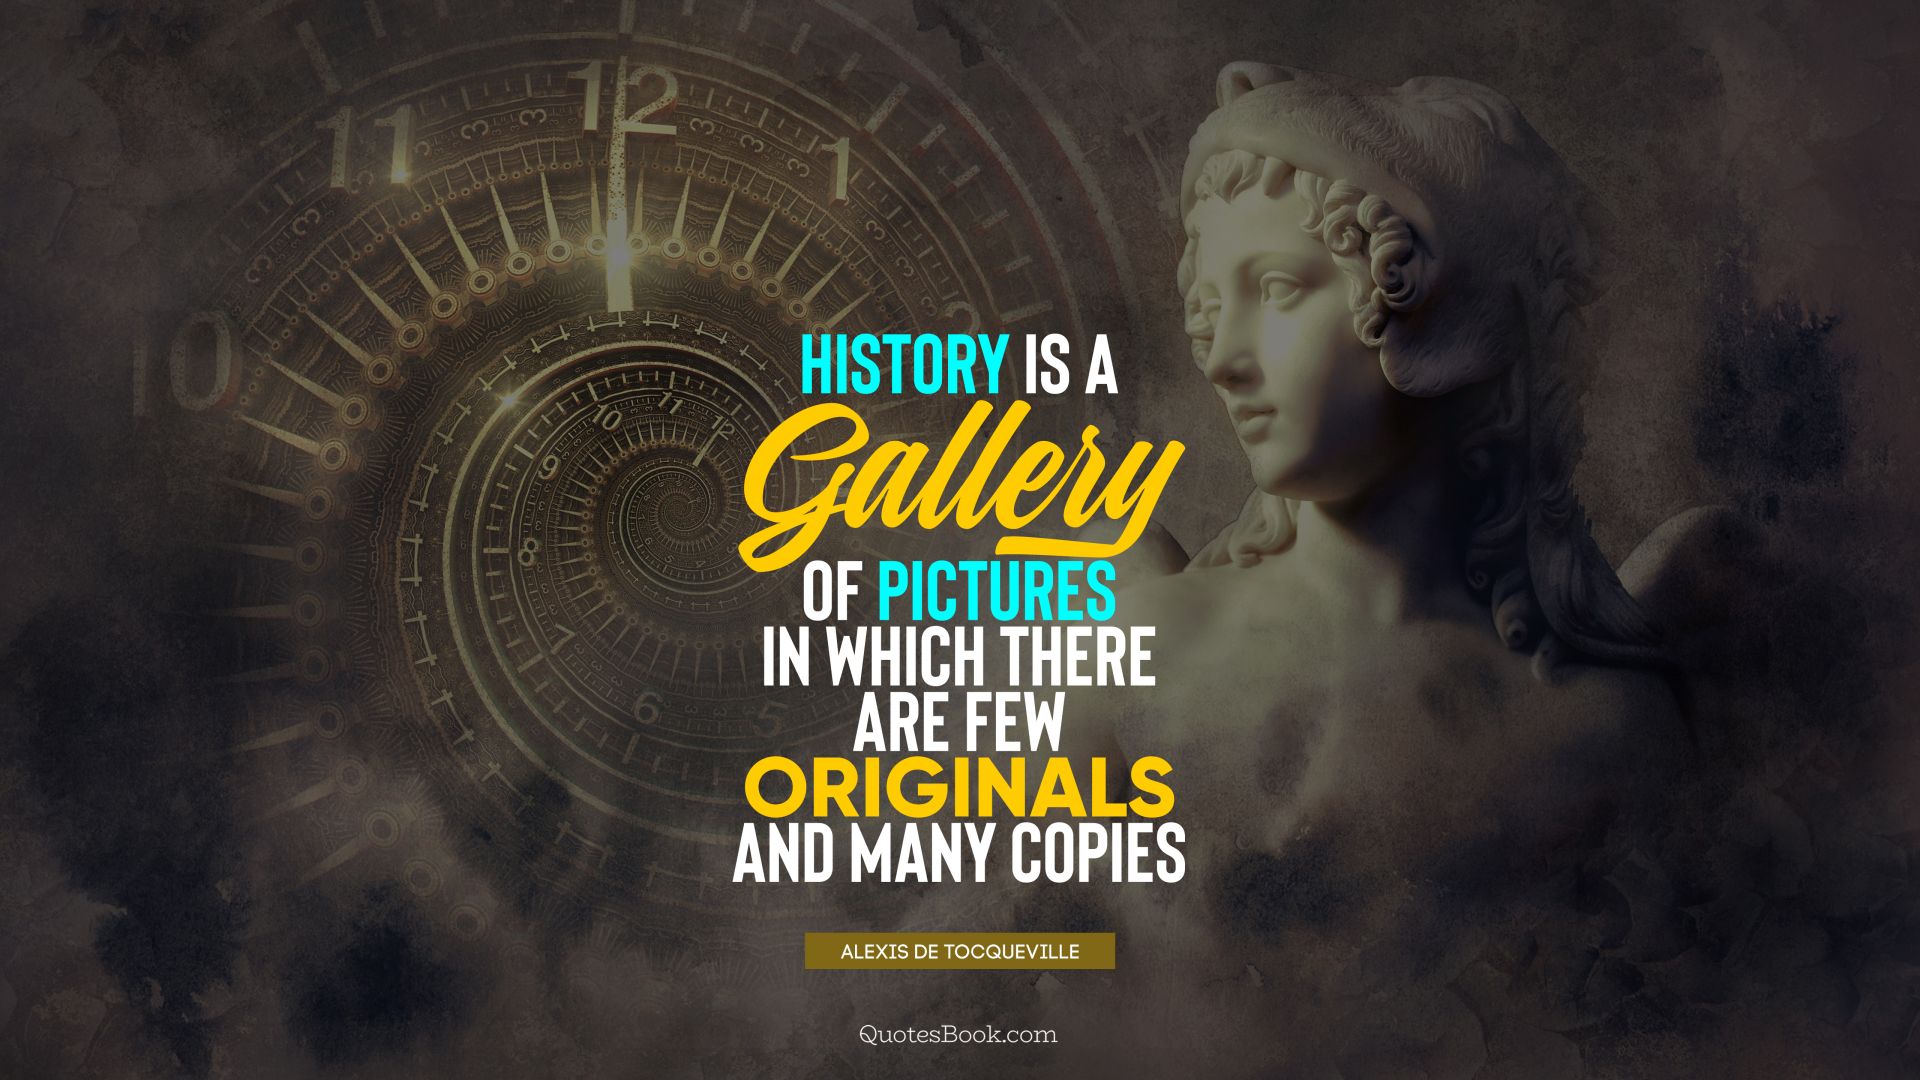 History is a gallery of pictures in which there are few originals and many copies. - Quote by Alexis de Tocqueville